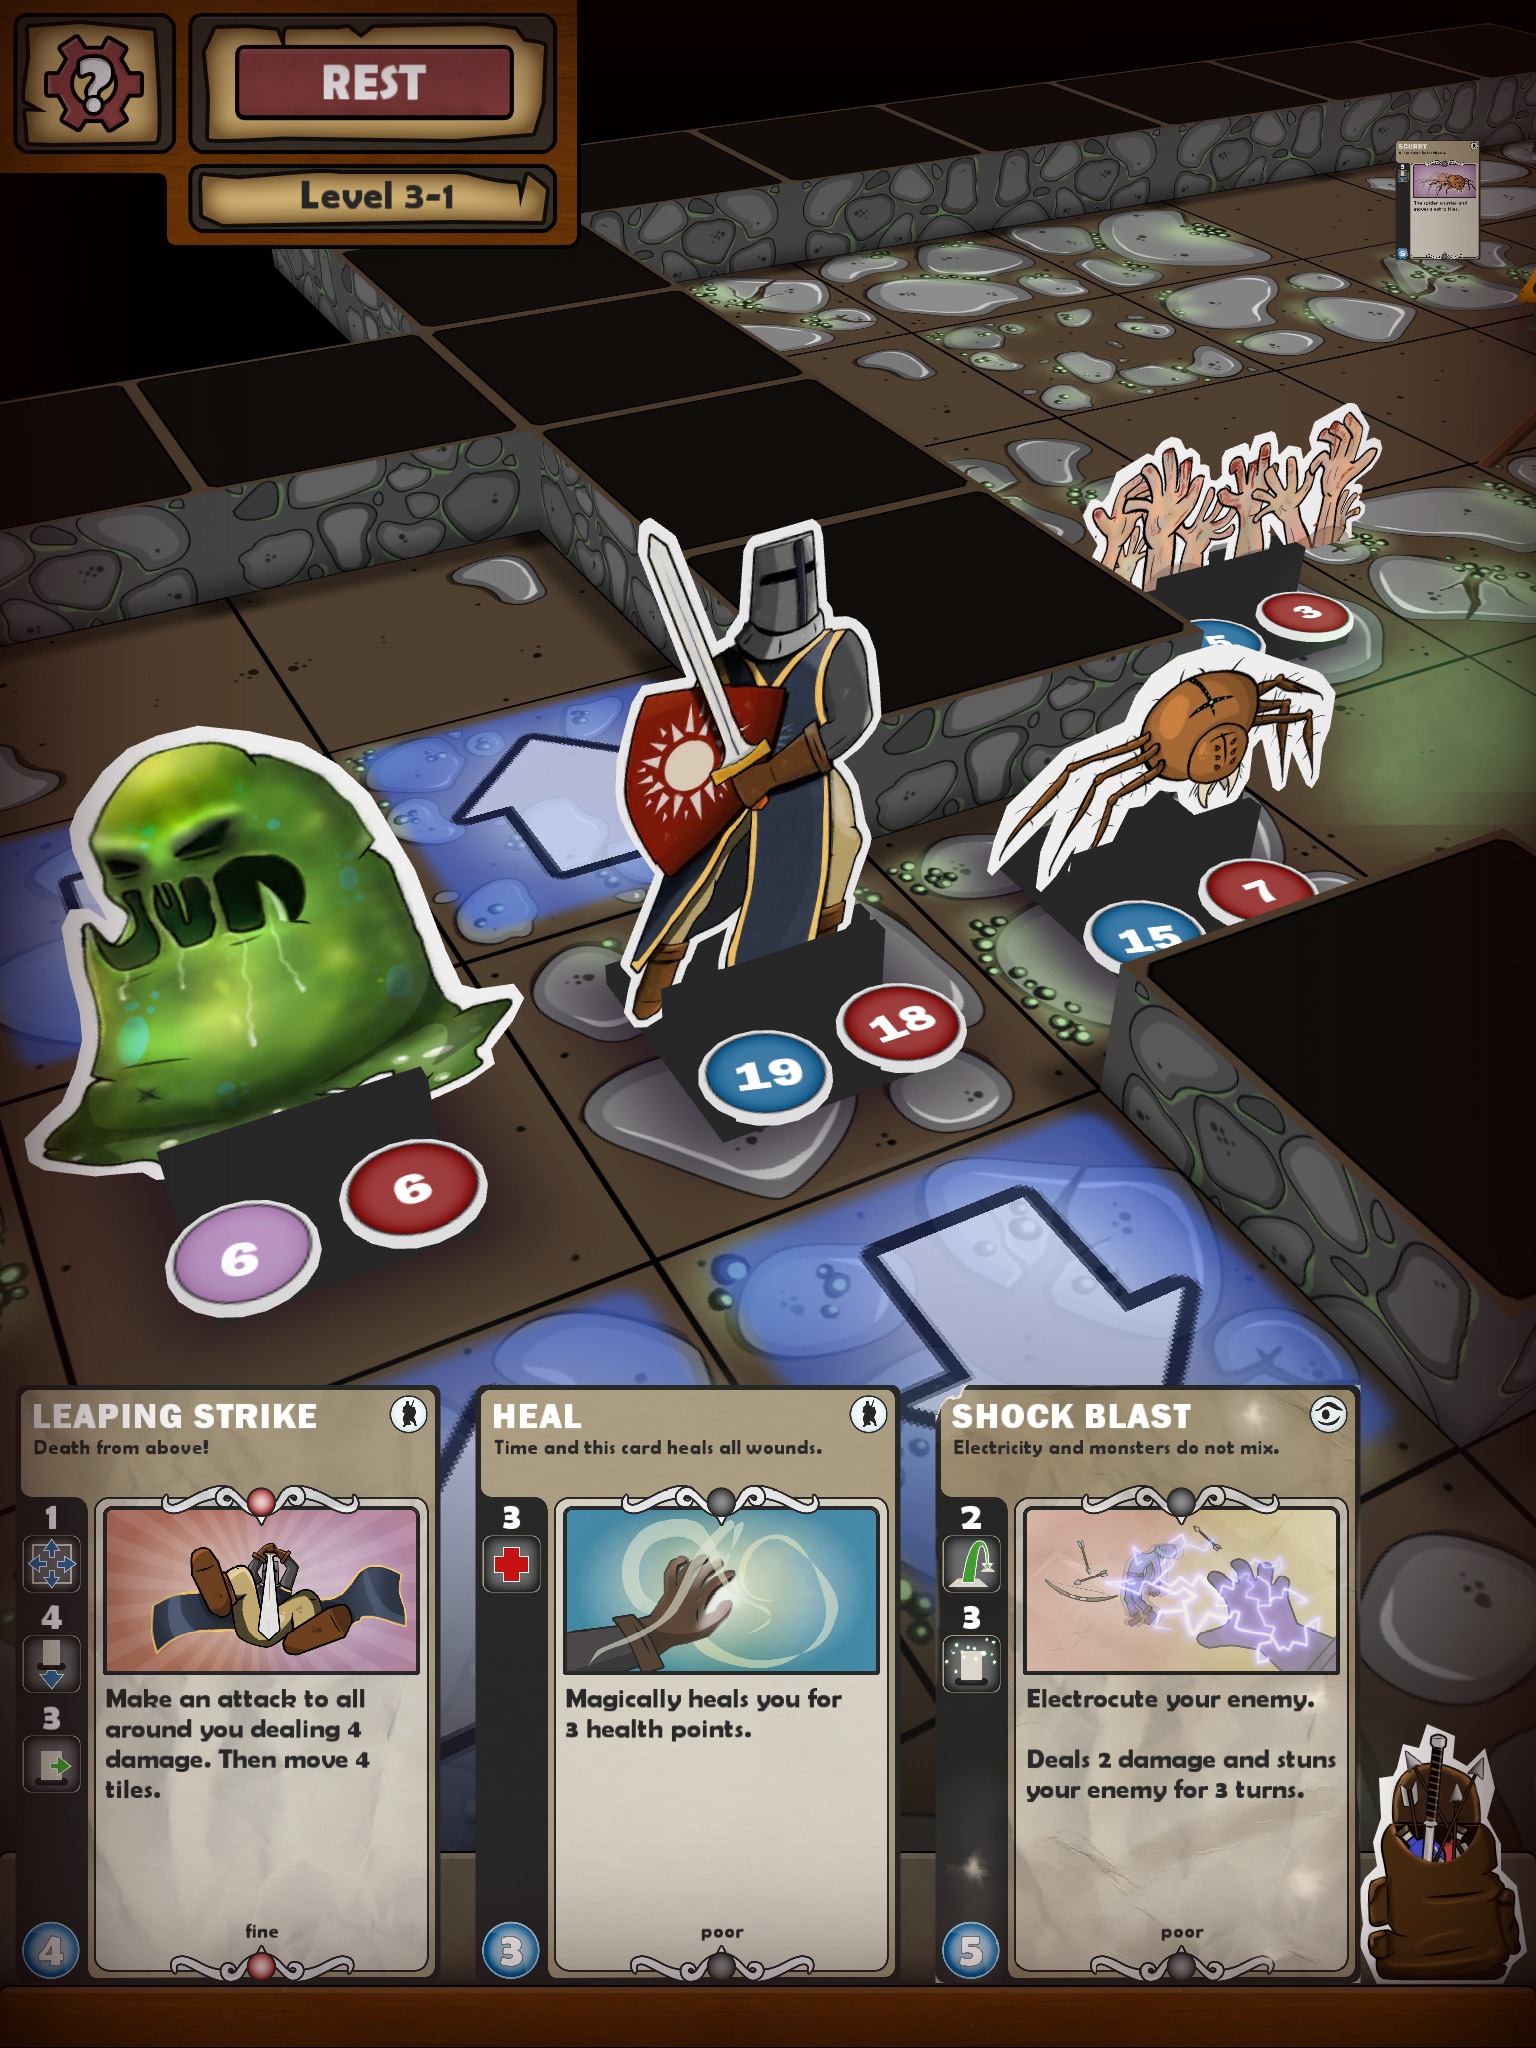 Card Dungeon Backgrounds, Compatible - PC, Mobile, Gadgets| 1536x2048 px